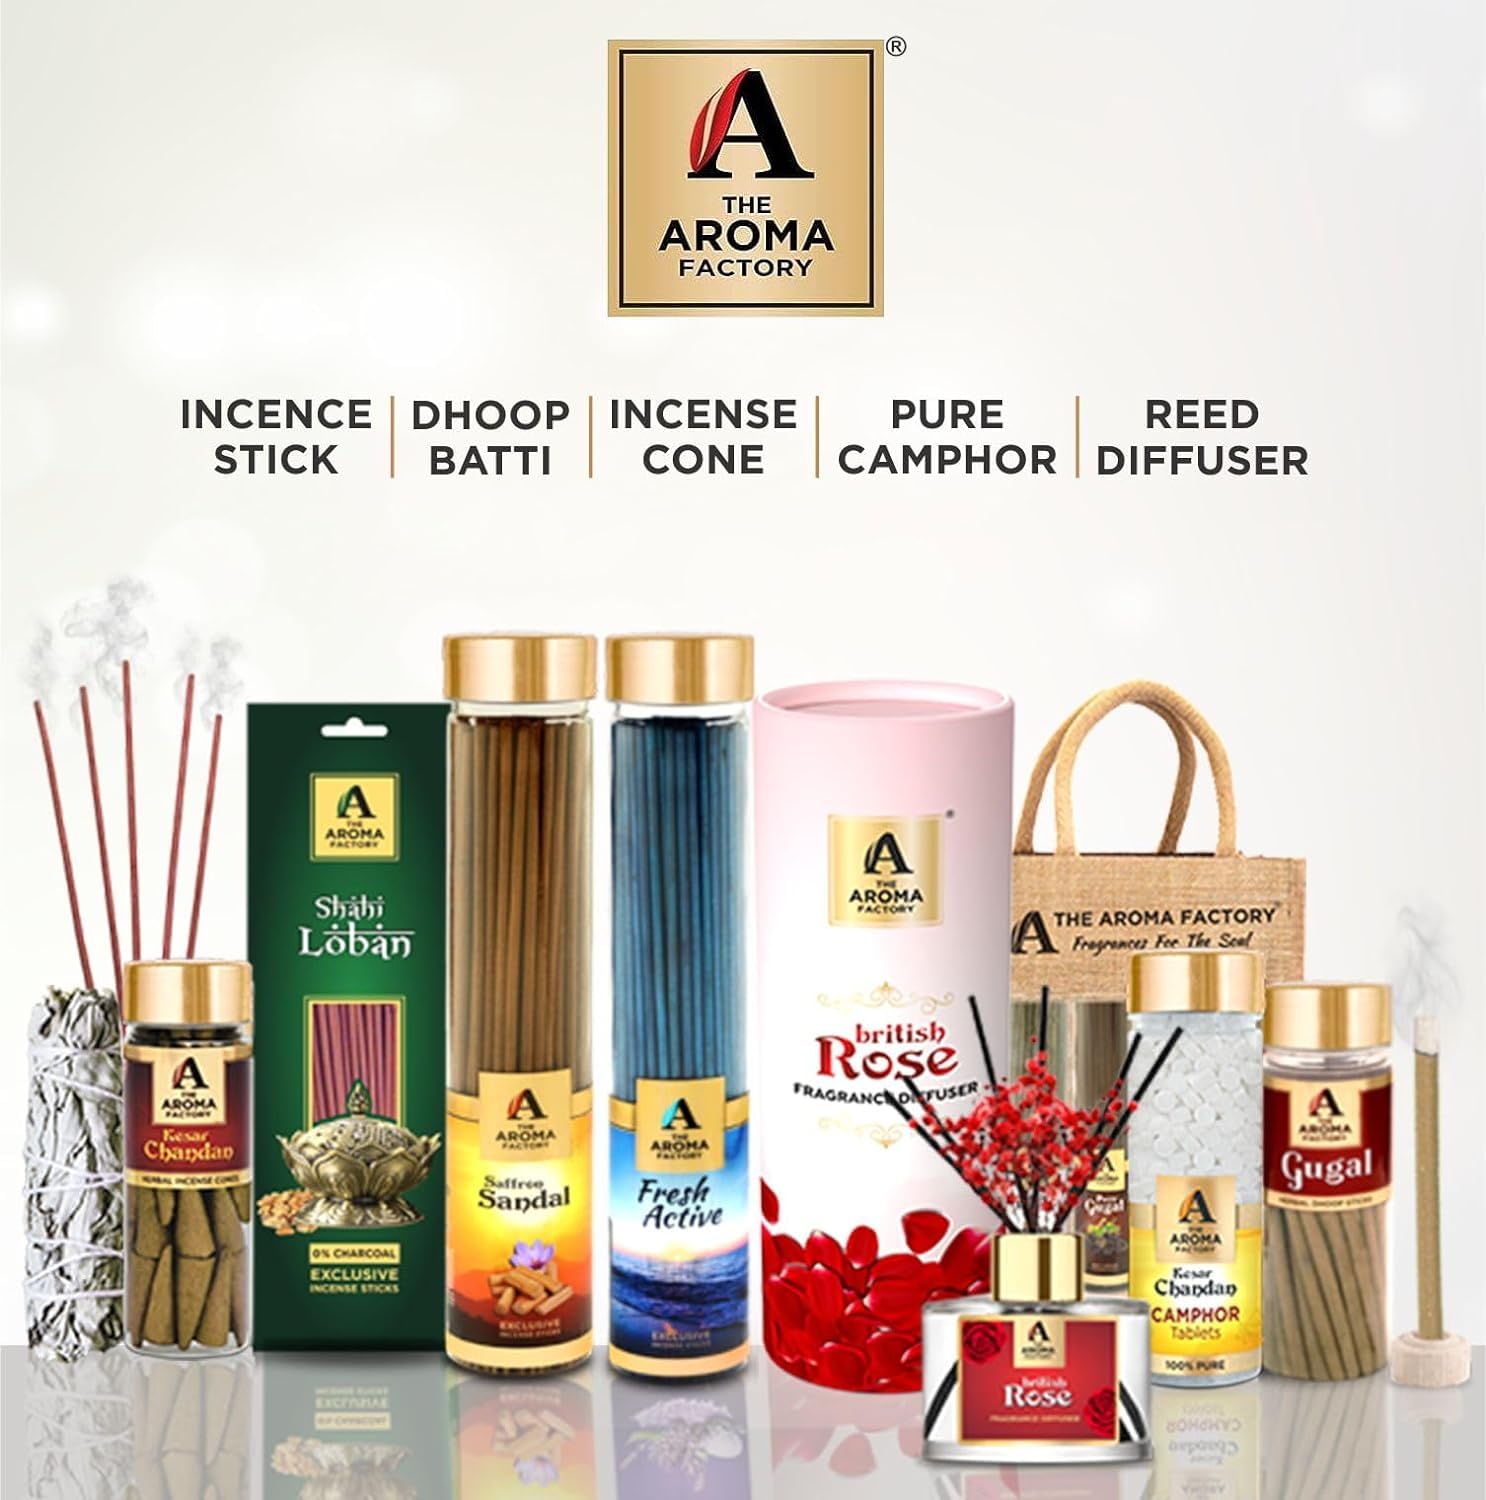 The Aroma Factory Happy Birthday Friend Gift with Card (25 Swad Candy, Strawberry Agarbatti Bottle, Rose Cone) in Jute Bag